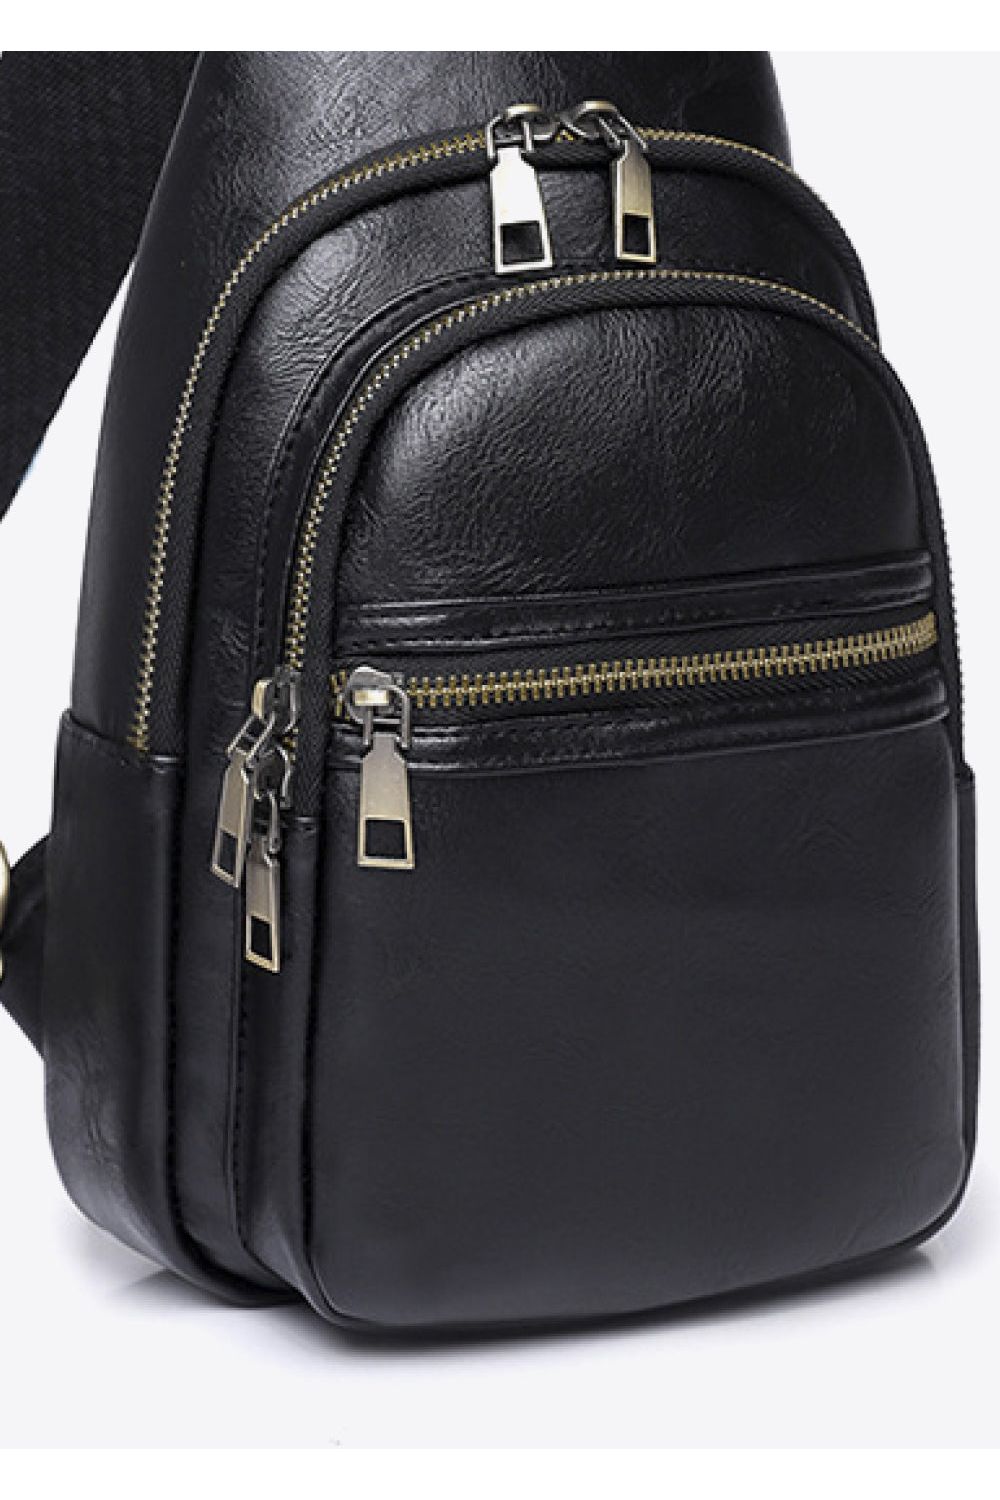 Women Adored It's Your Time PU Leather Black Sling Bag